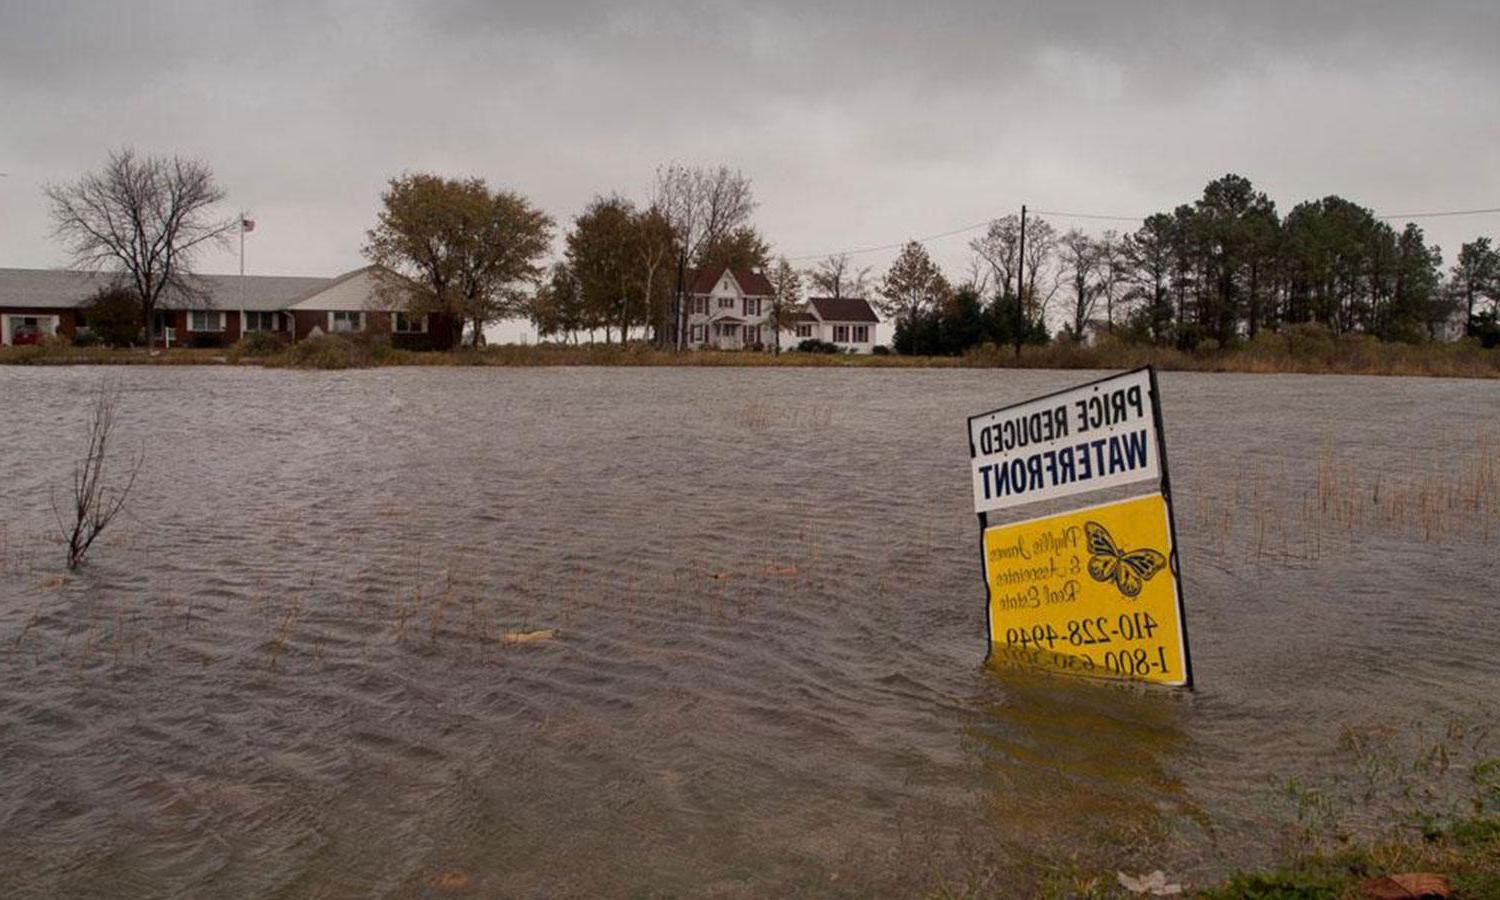 A waterfront property for sale sign submerged in flood waters